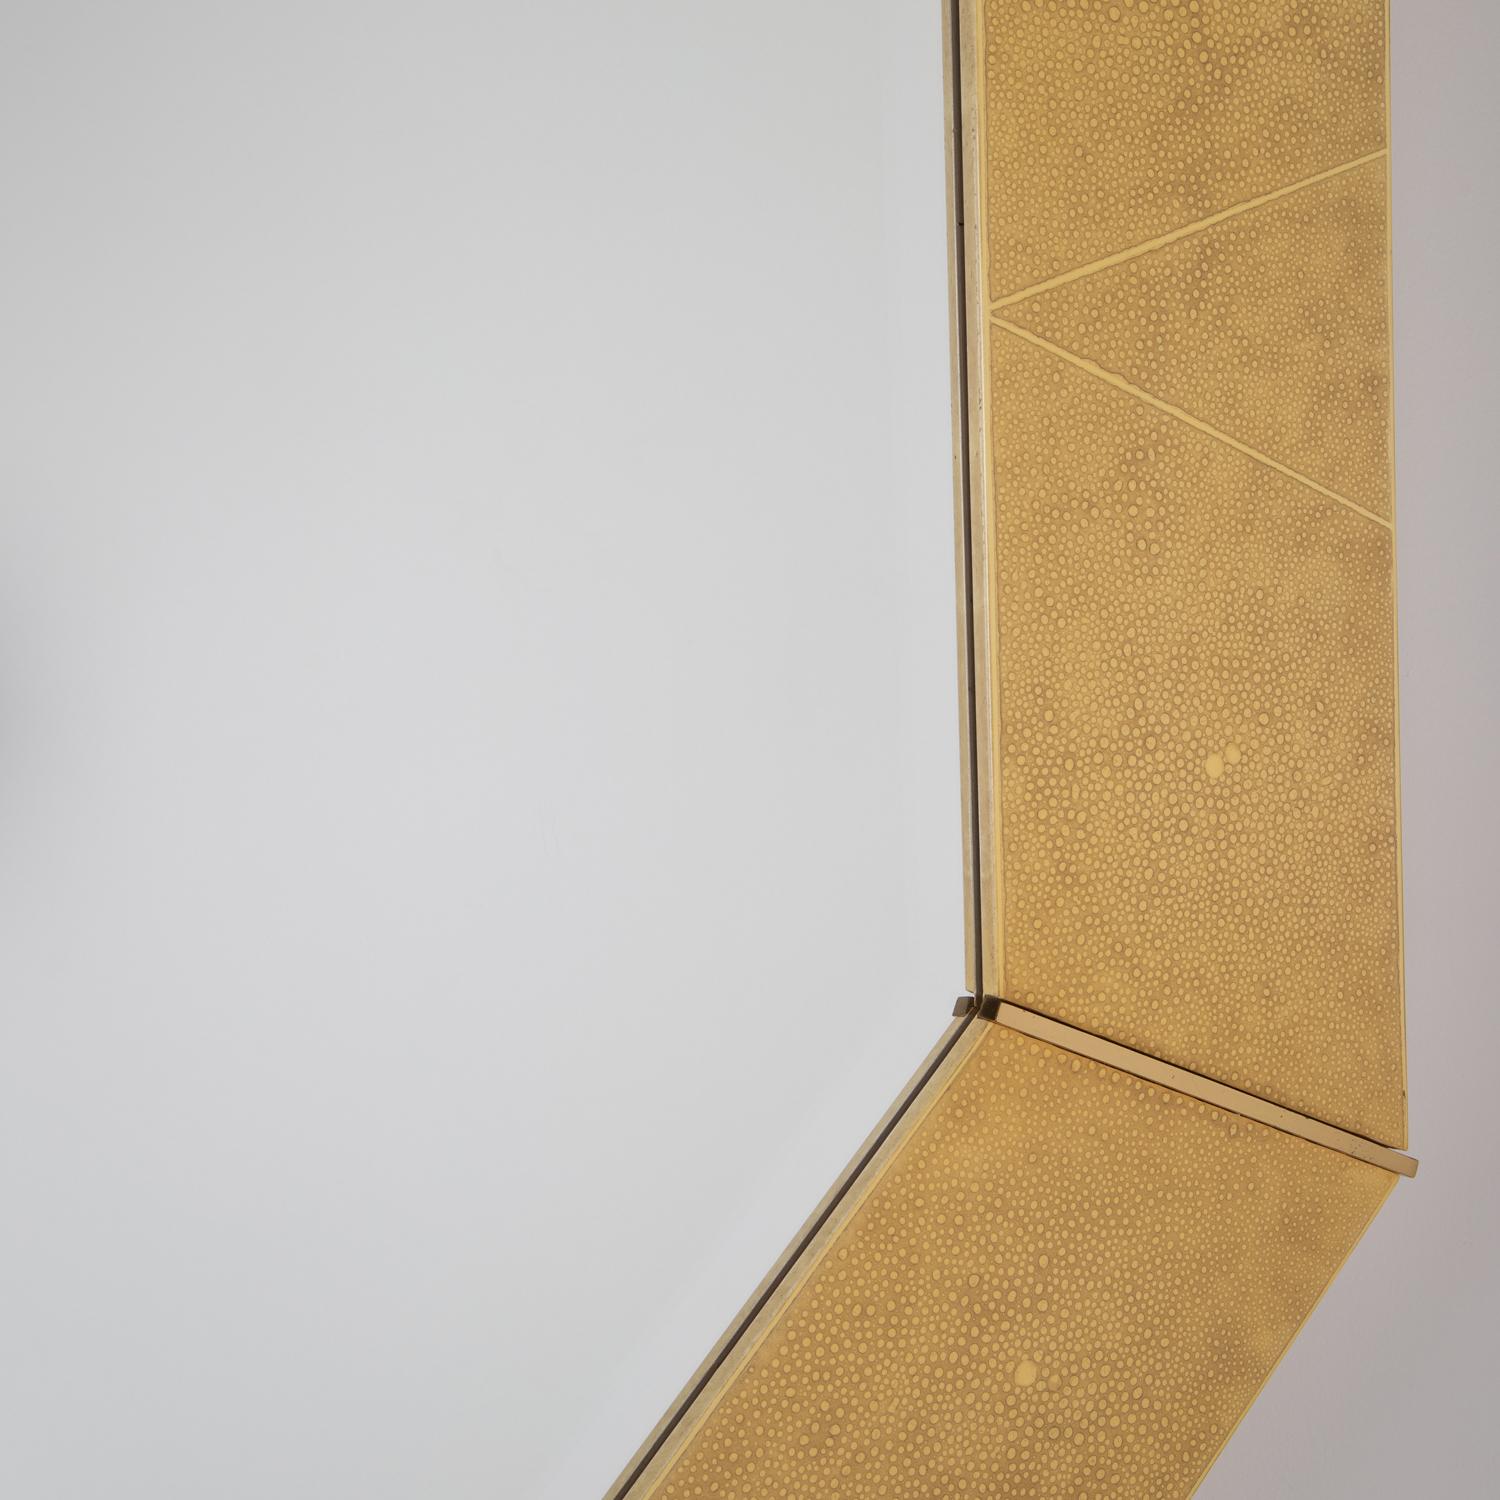 American Karl Springer Octagonal Mirror in Shagreen Lacquer with Brass Accents, 1980s For Sale